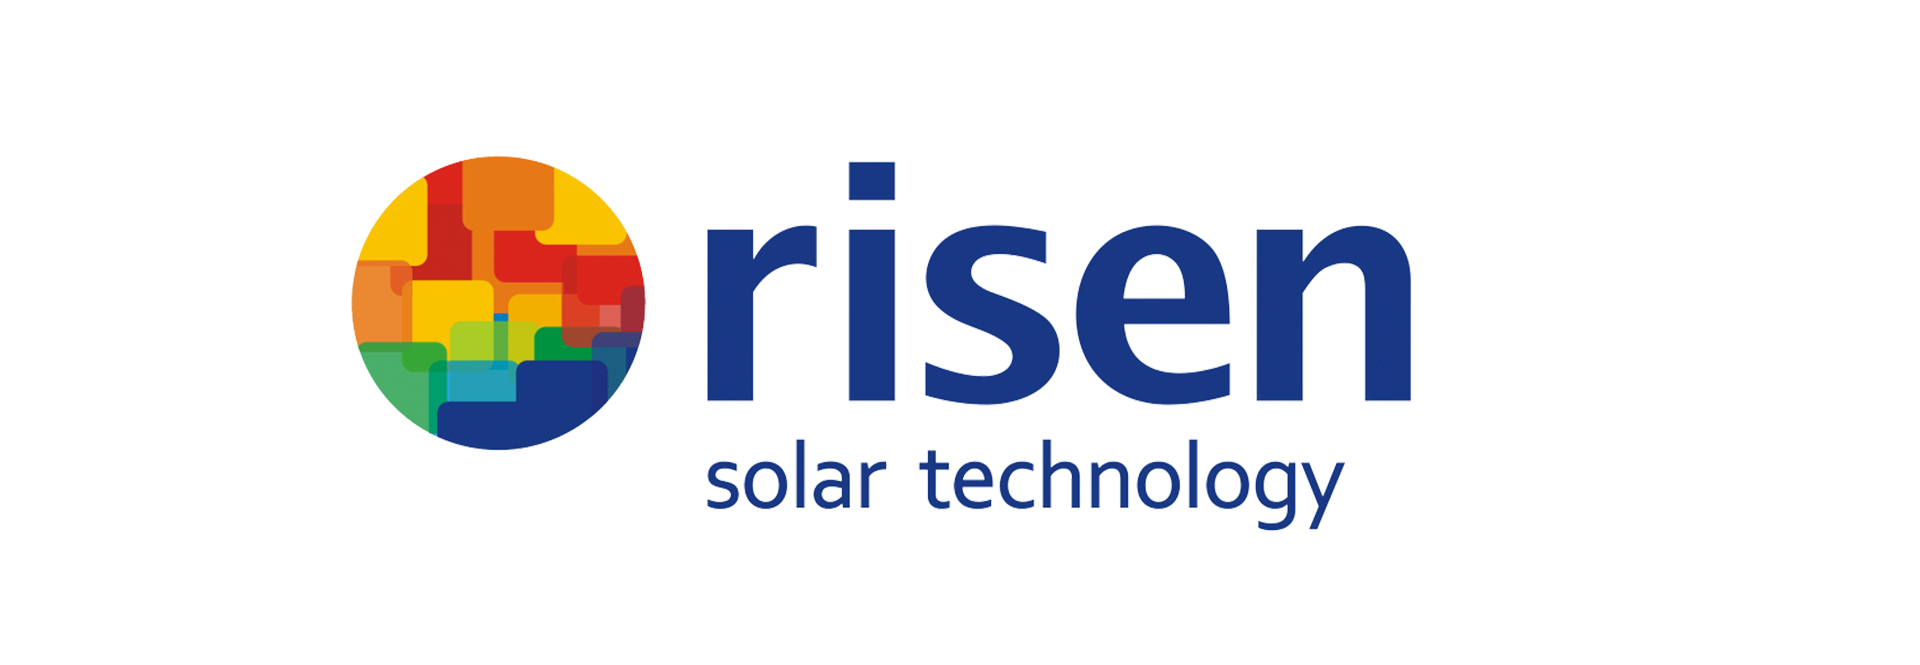 The logo for risen solar technology has a colorful circle in the middle.